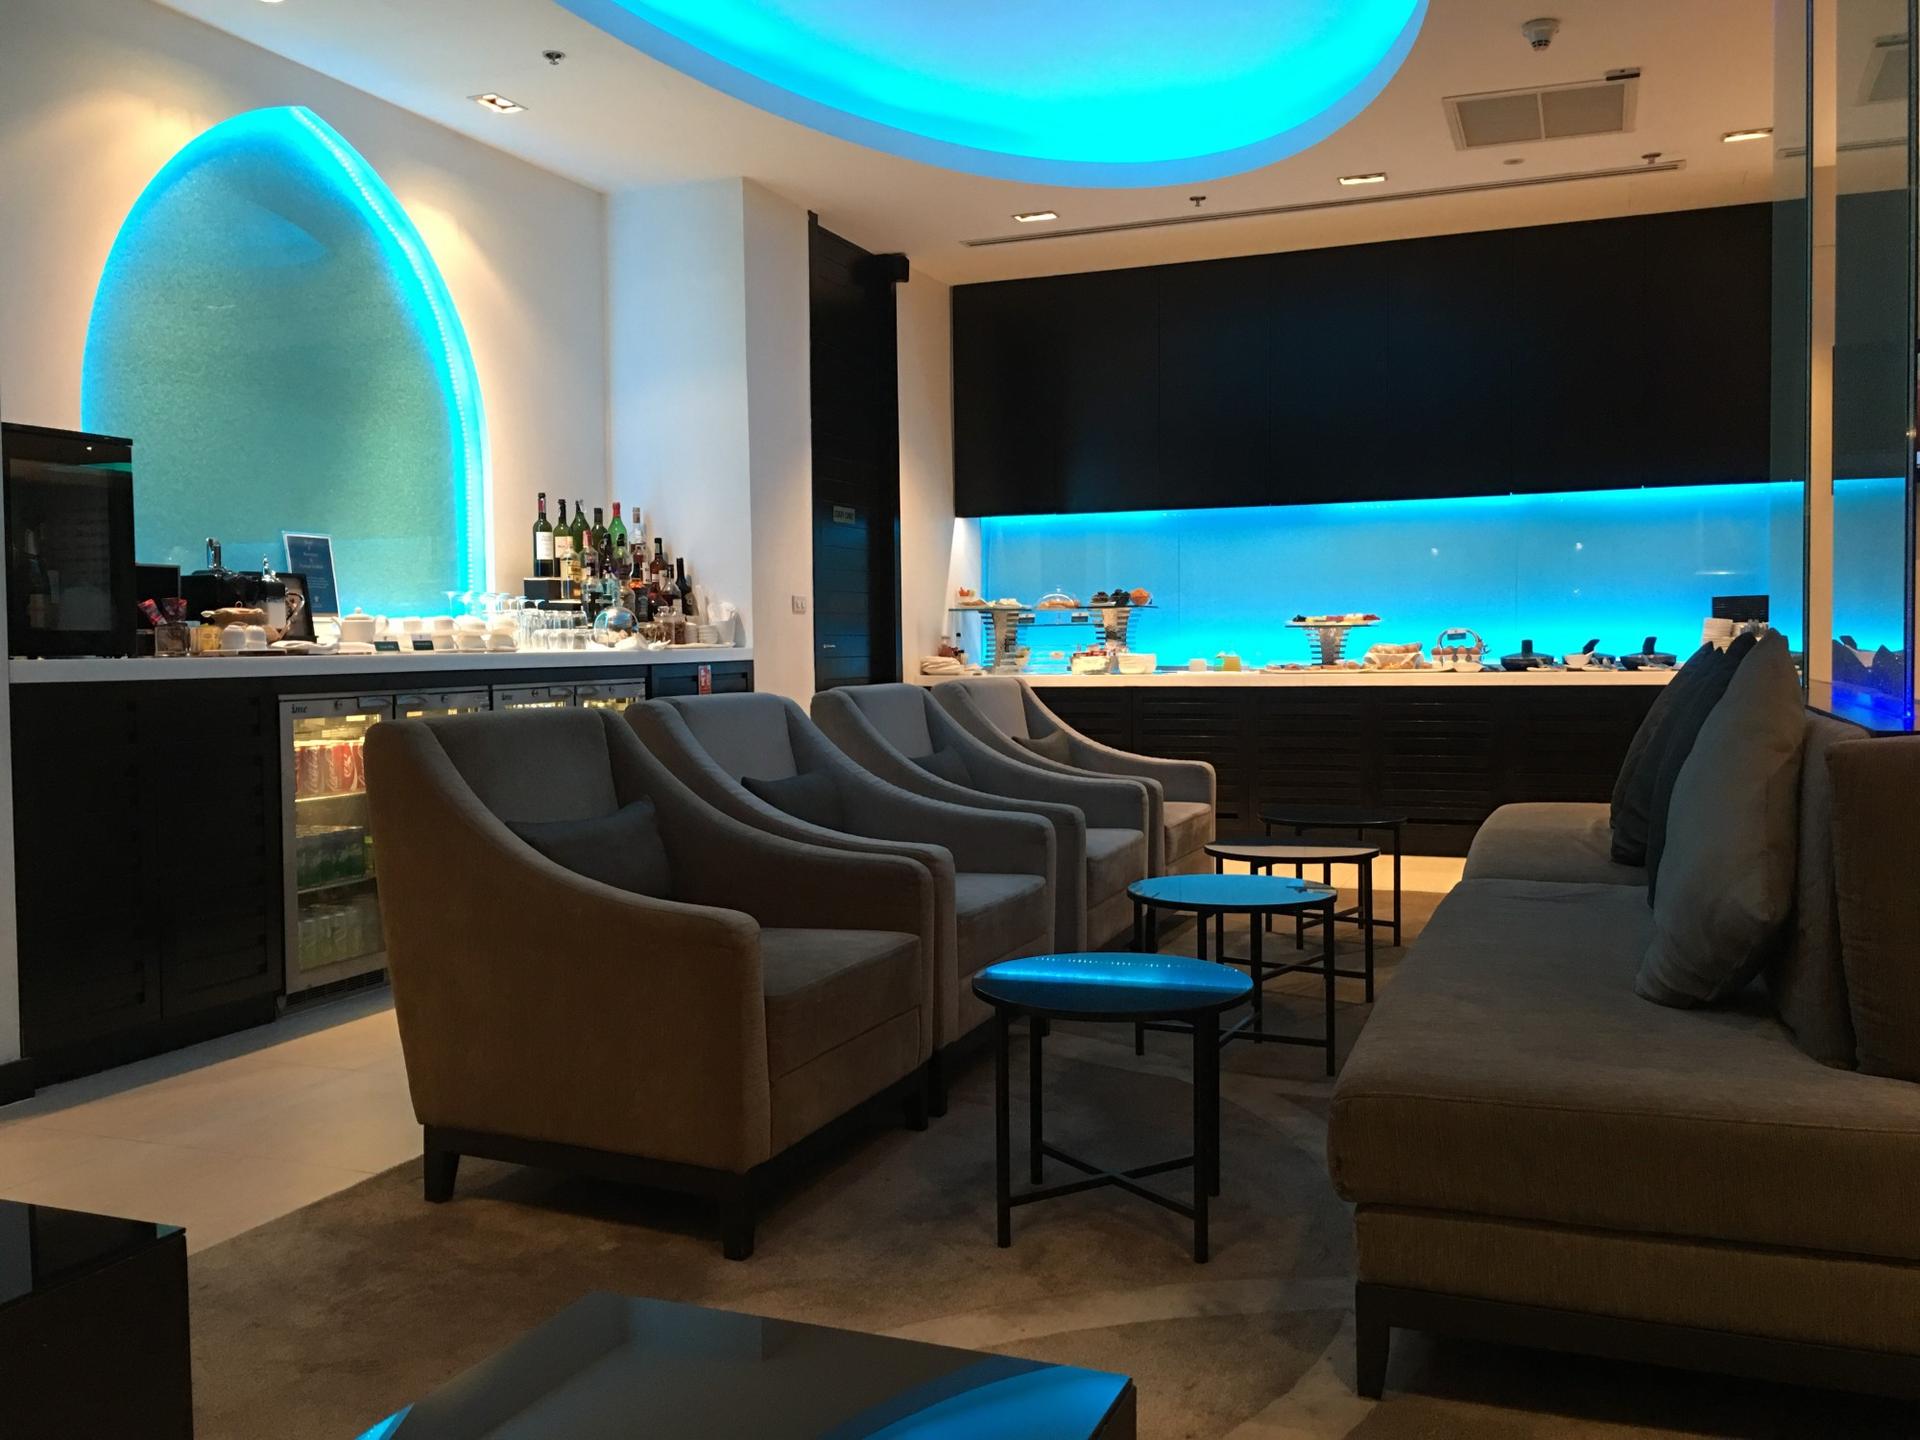 Oman Air First and Business Class Lounge image 6 of 42